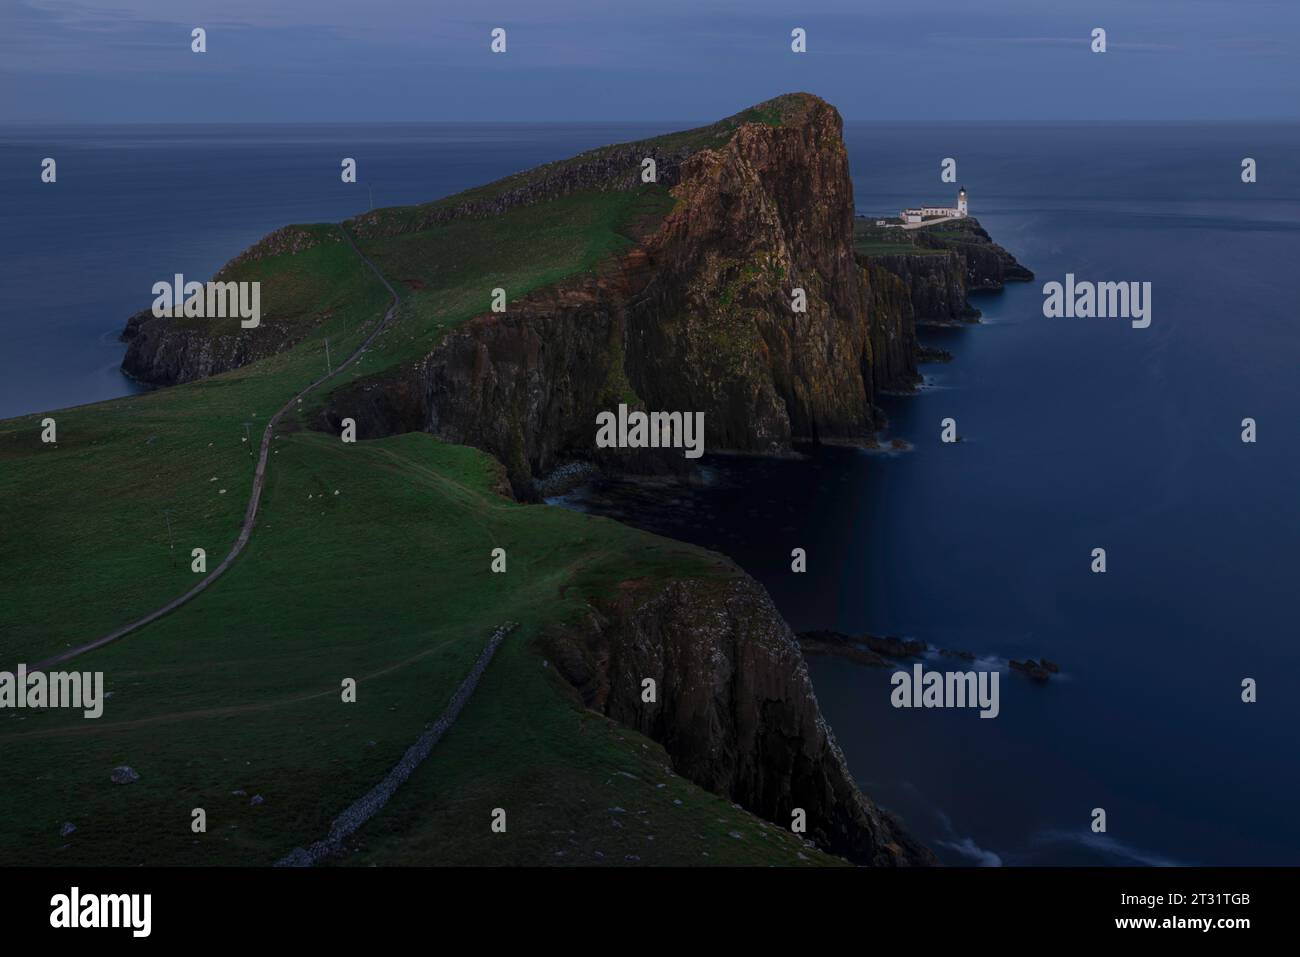 Neist Point is a dramatic headland on the Isle of Skye, with towering sea cliffs, dramatic rock formations, and an iconic lighthouse. Stock Photo